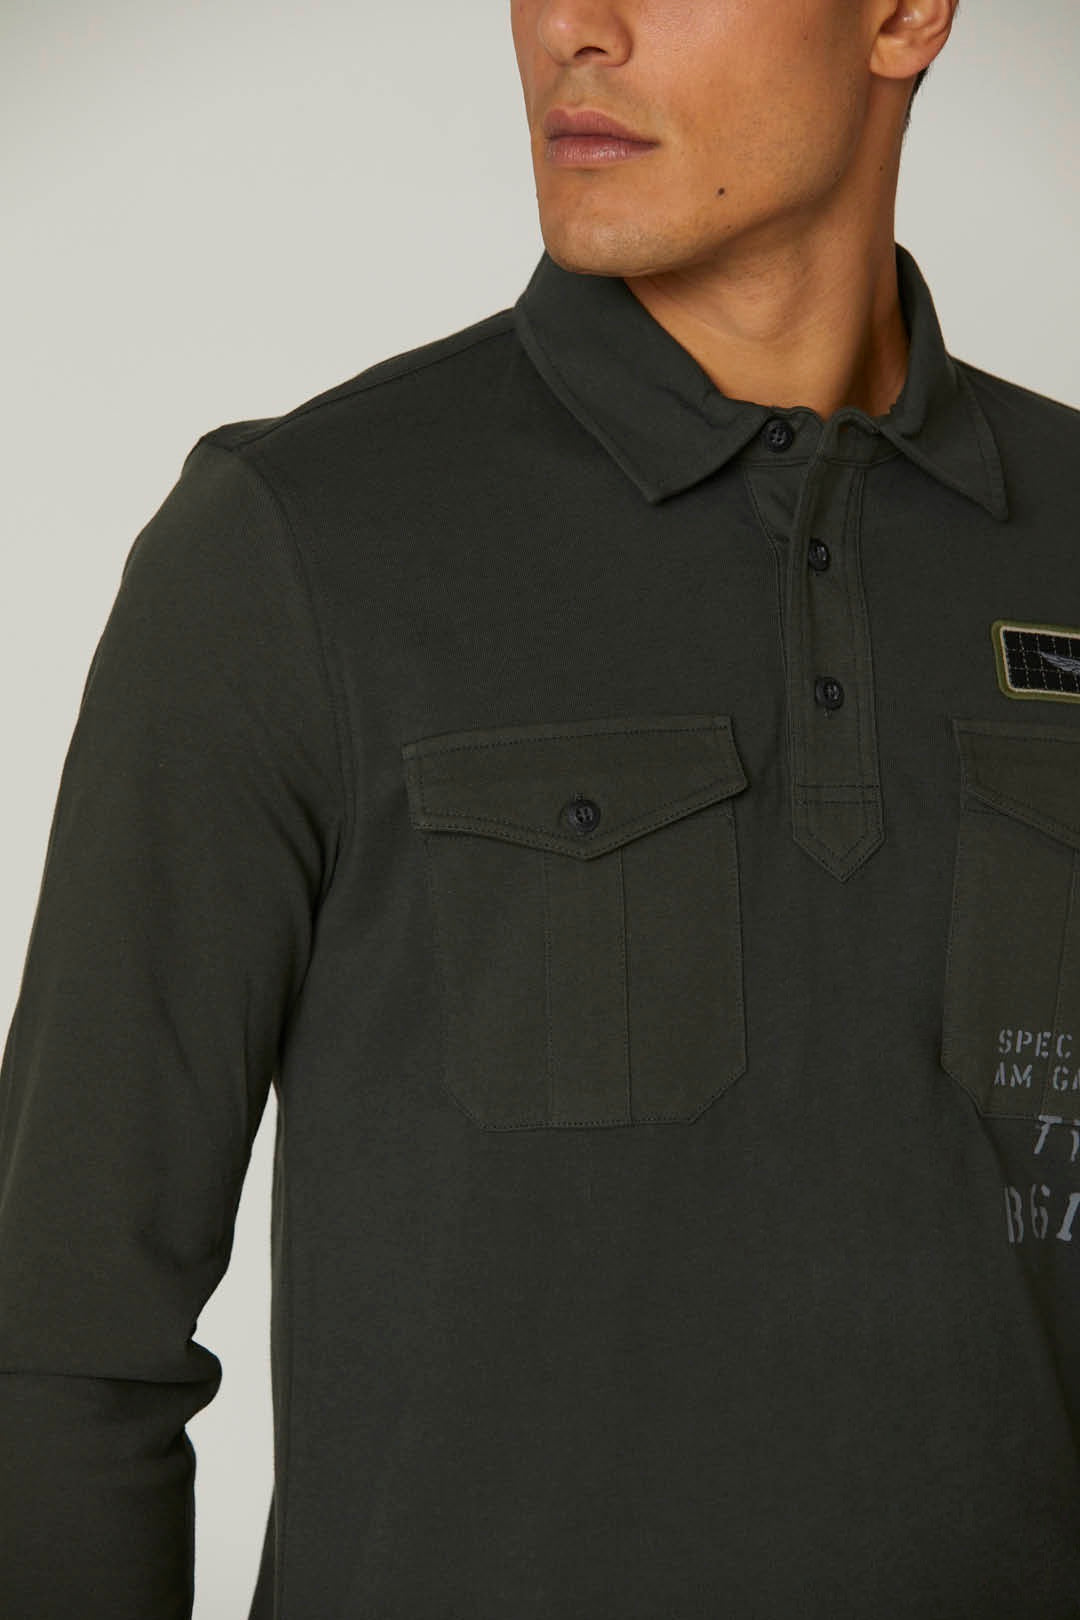 Military polo shirt with chest pockets